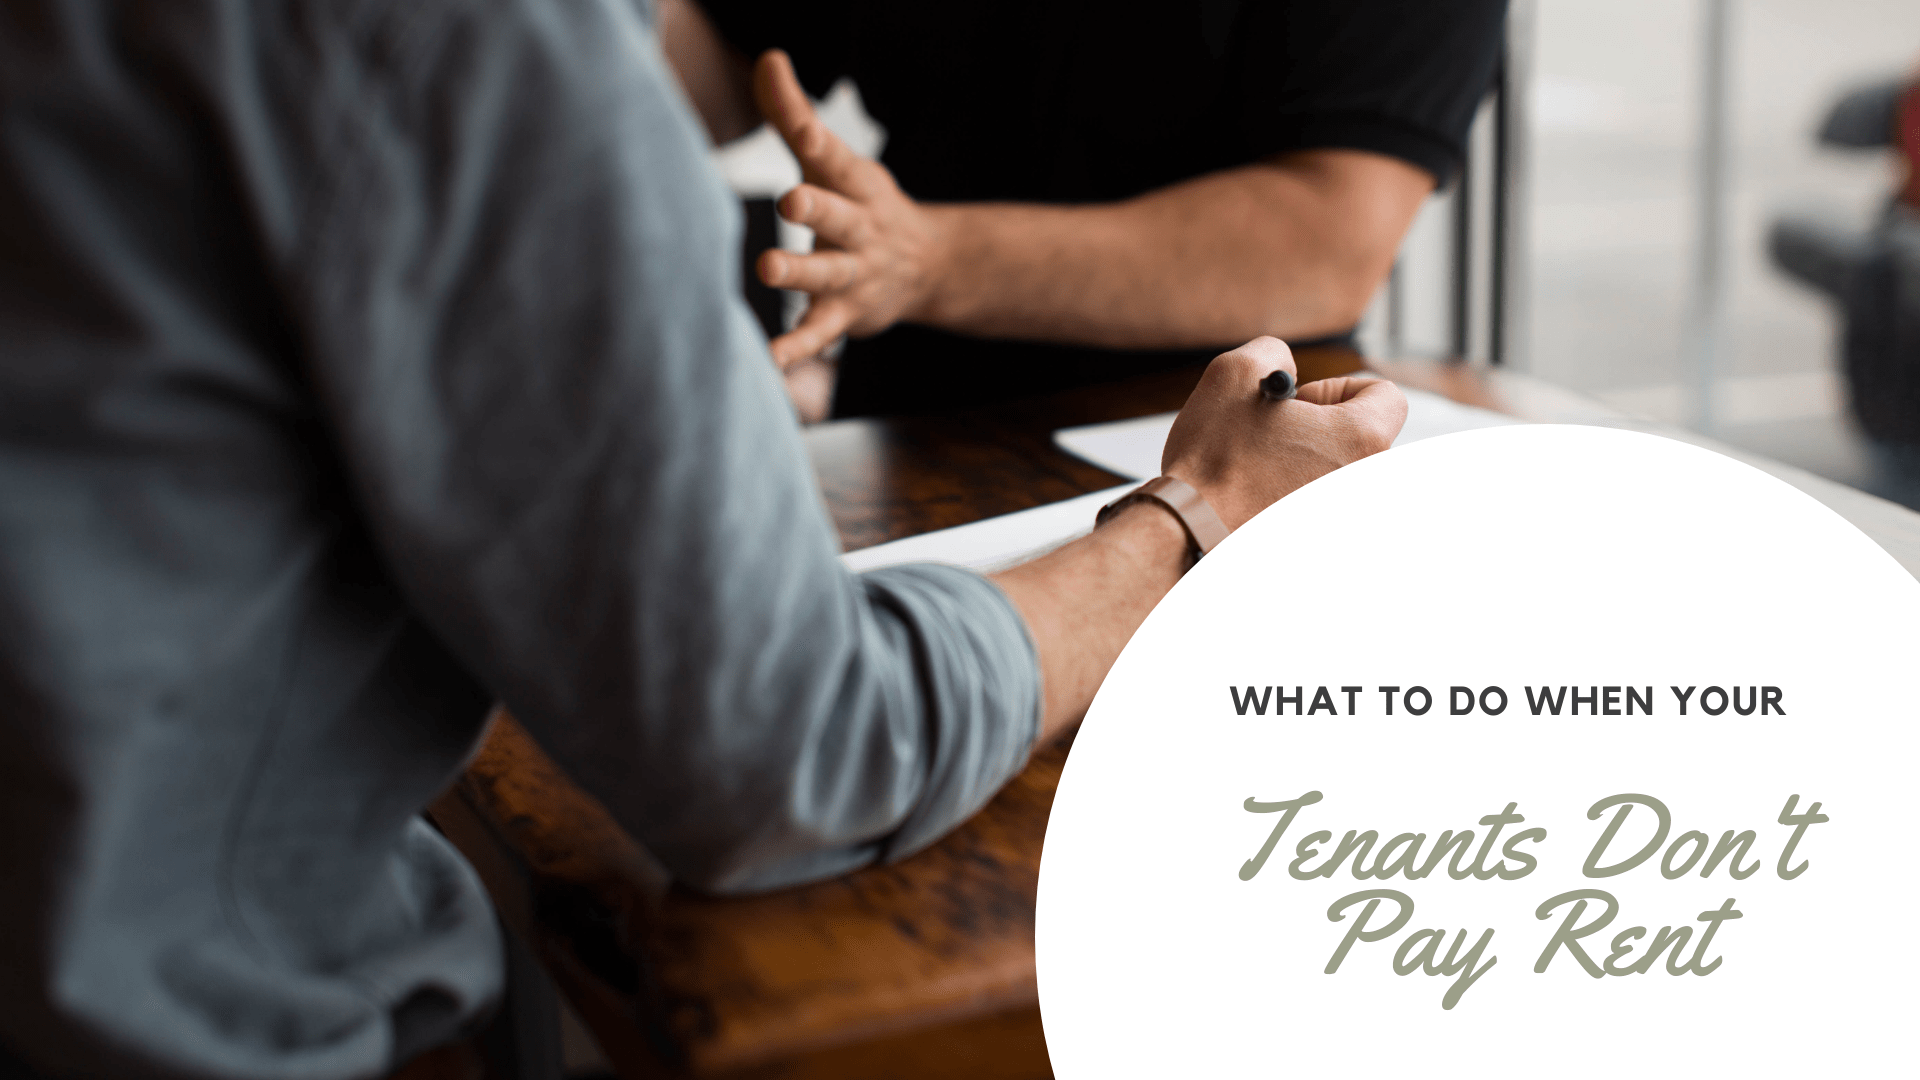 What to Do When Your Tenants Don't Pay Rent | Healdsburg Property Management Tips